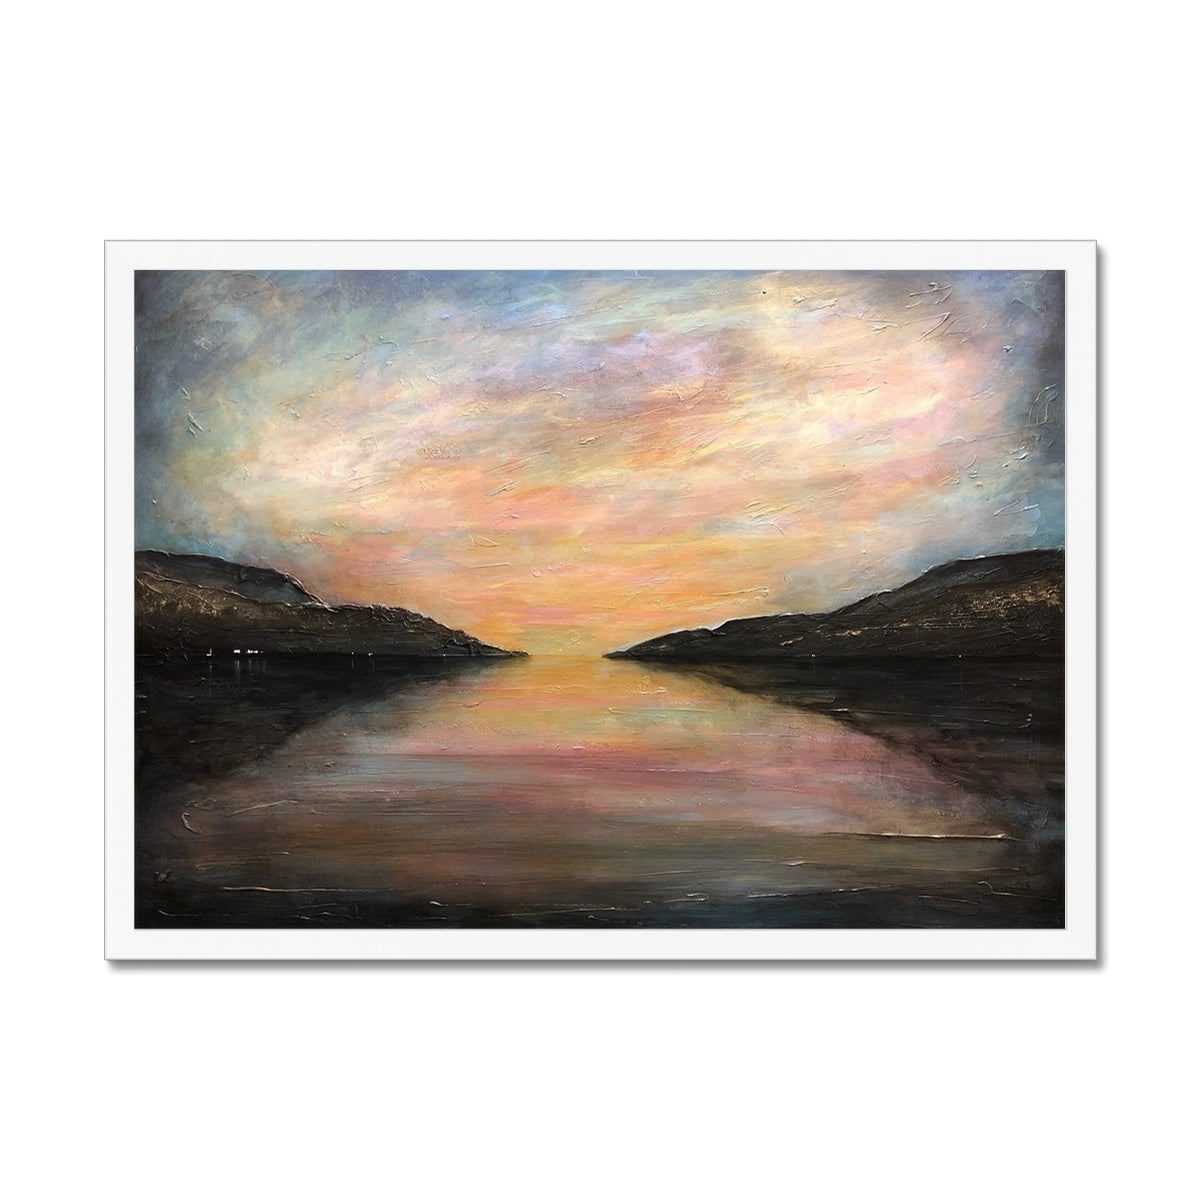 Loch Ness Glow Painting | Framed Prints From Scotland-Framed Prints-Scottish Lochs & Mountains Art Gallery-A2 Landscape-White Frame-Paintings, Prints, Homeware, Art Gifts From Scotland By Scottish Artist Kevin Hunter